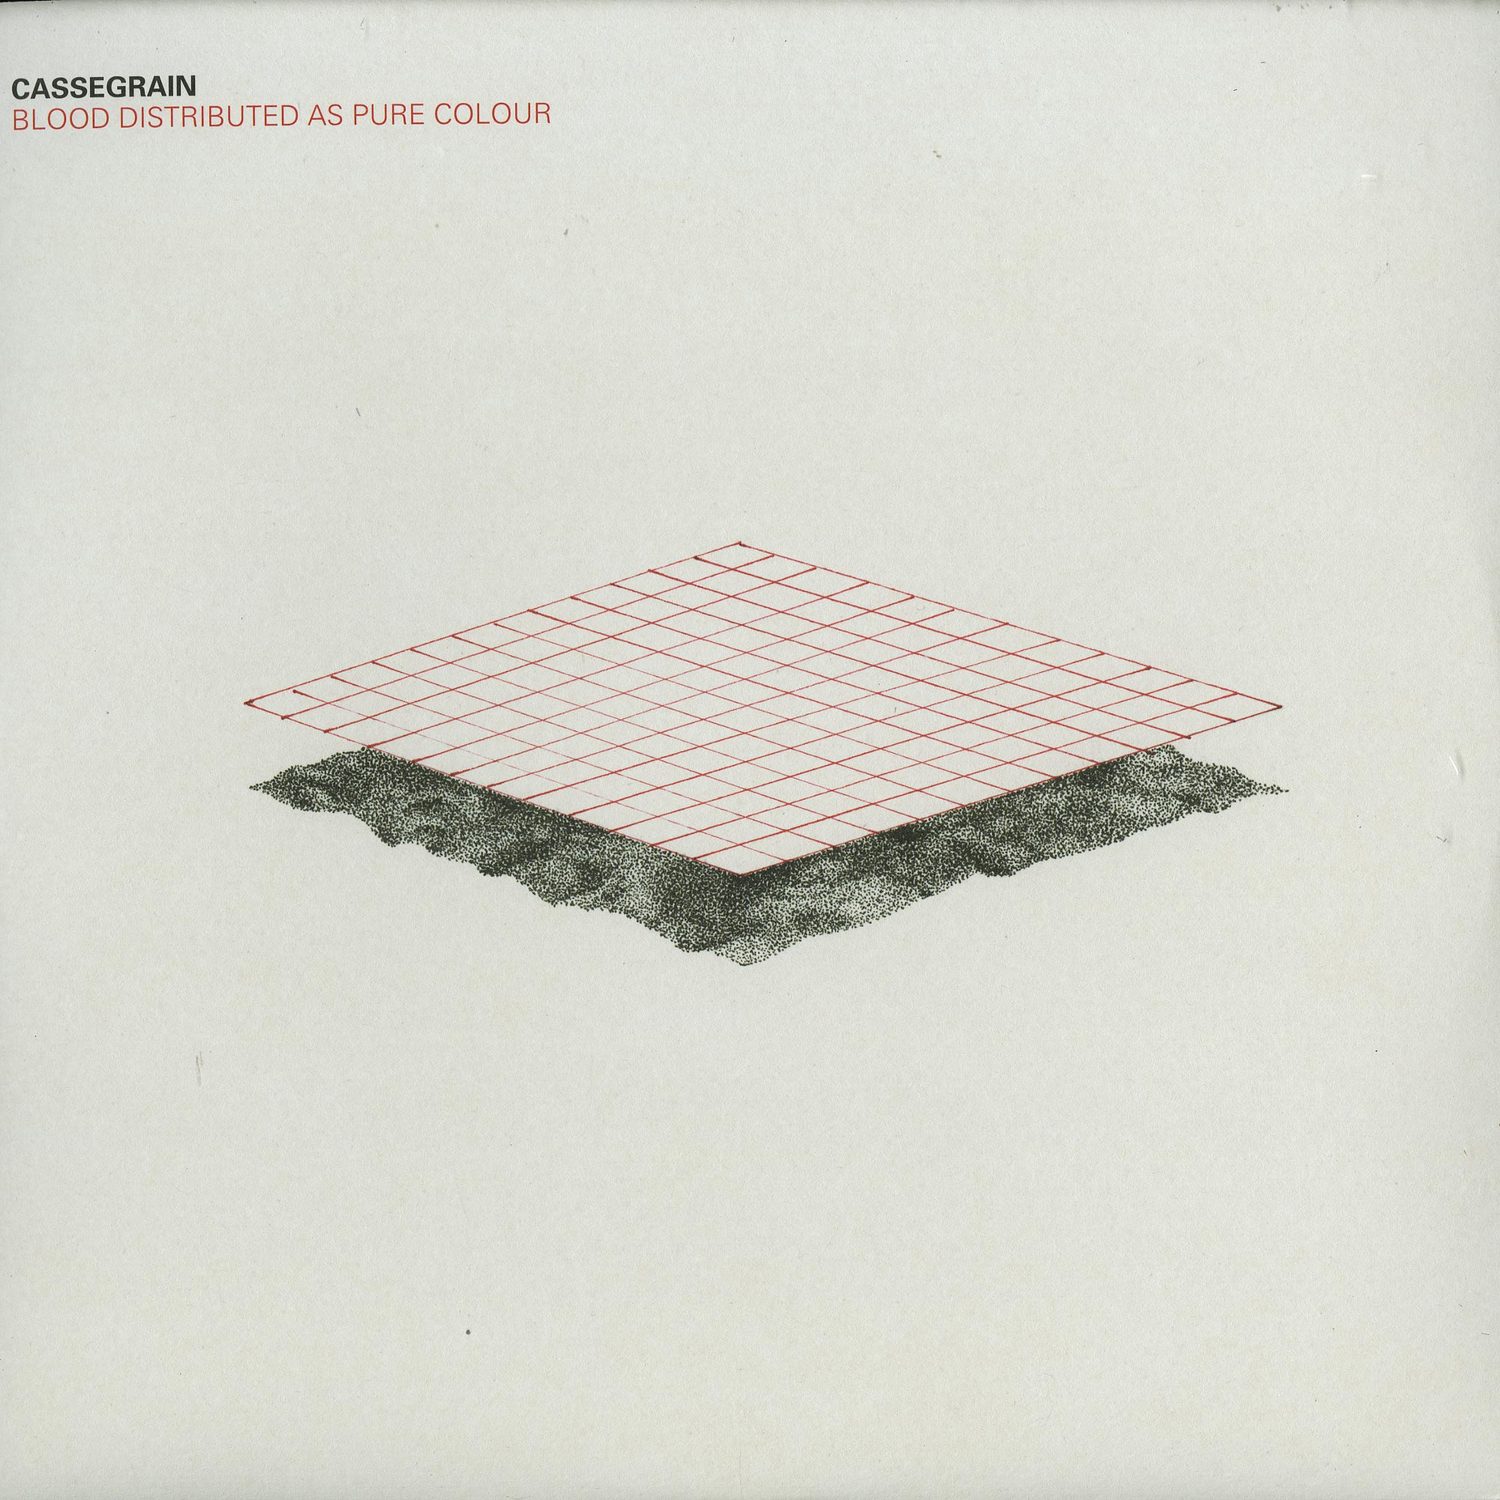 Cassegrain - BLOOD DISTRIBUTED AS PURE COLOUR